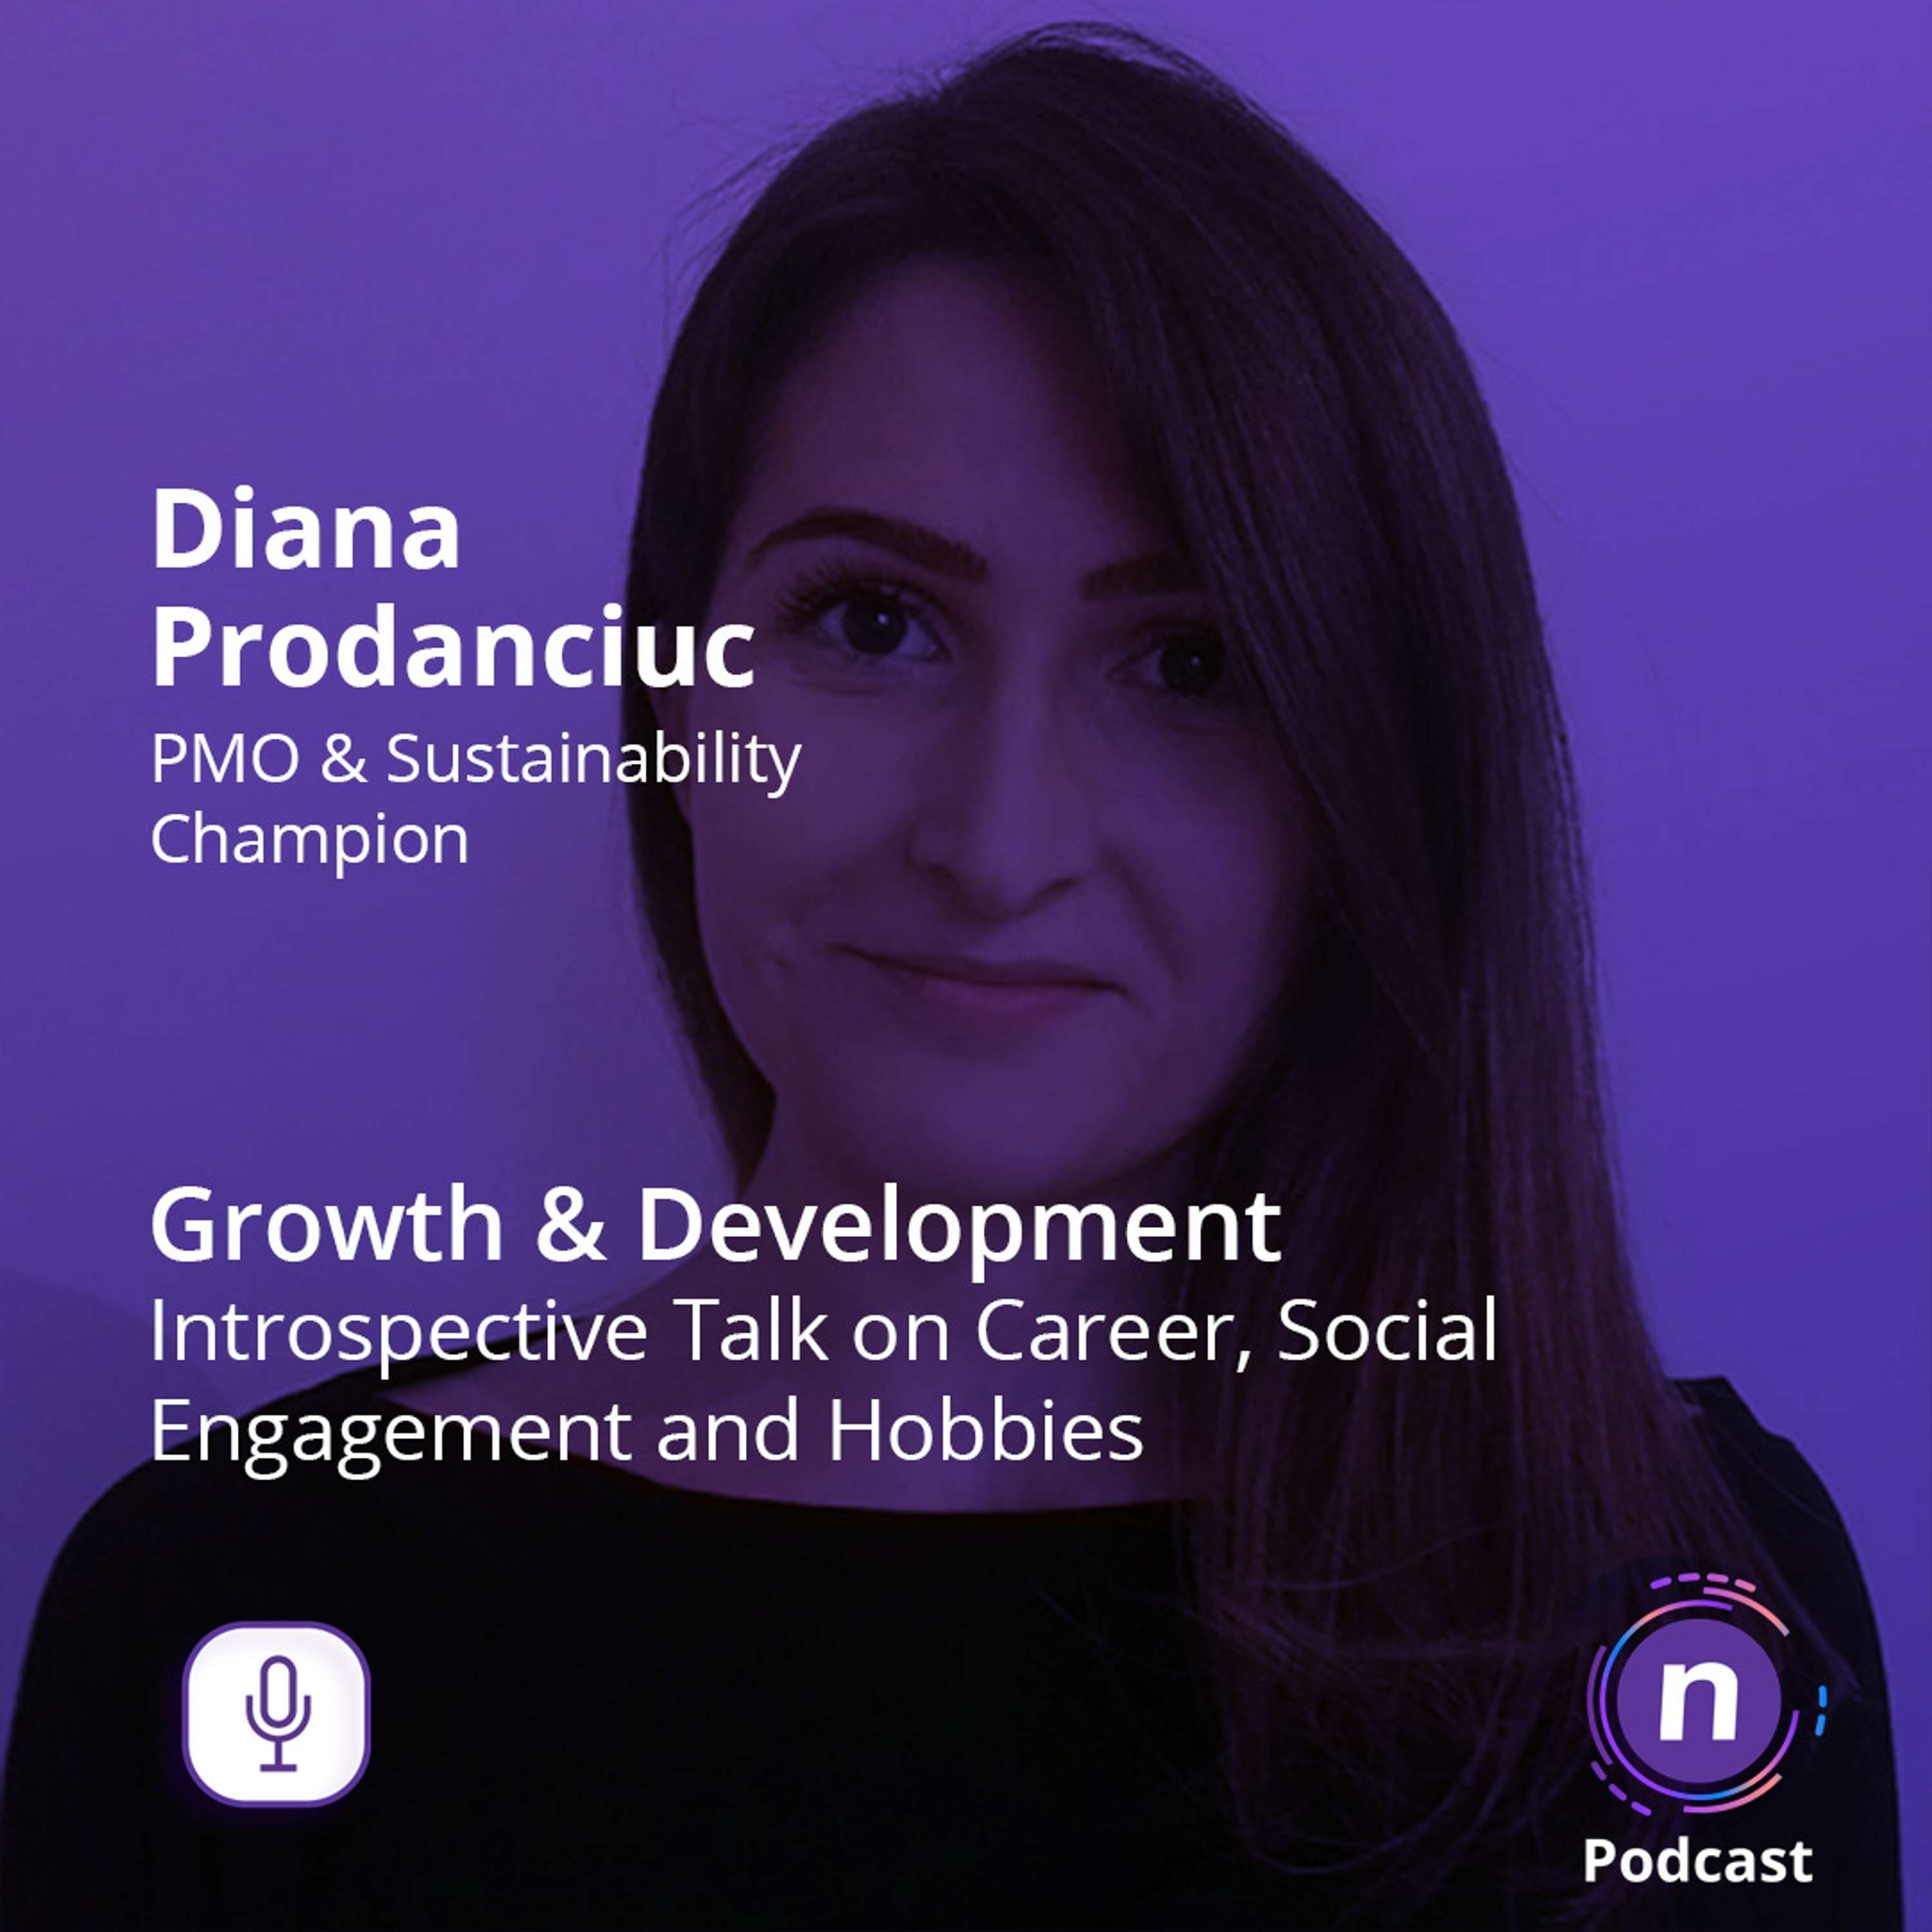 Growth & Development: Introspective Talk on Career, Social Engagement and Hobbies